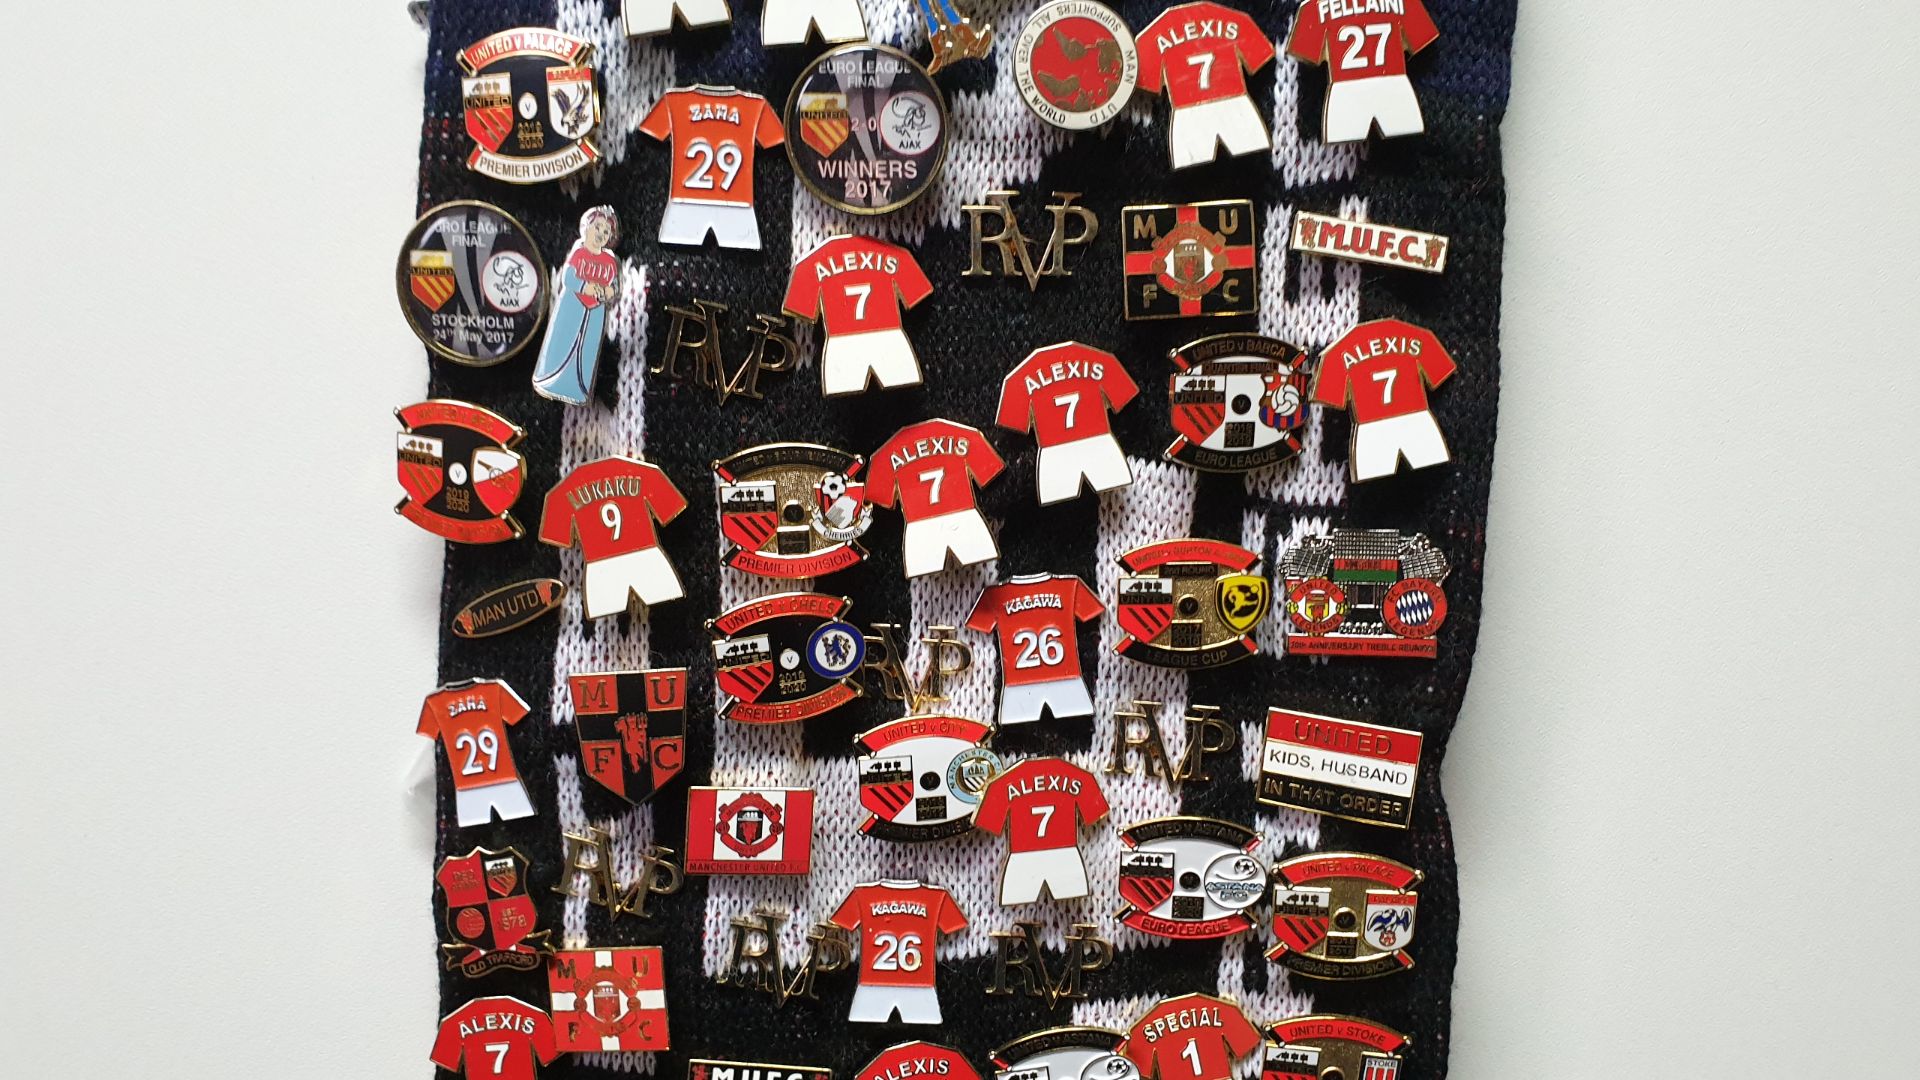 MANCHESTER UNITED SCARF CONTAINING APPROX 220 X PIN BADGES IE MUFC, OLD TRAFFORD, WE HATE CITY, EURO - Image 6 of 8